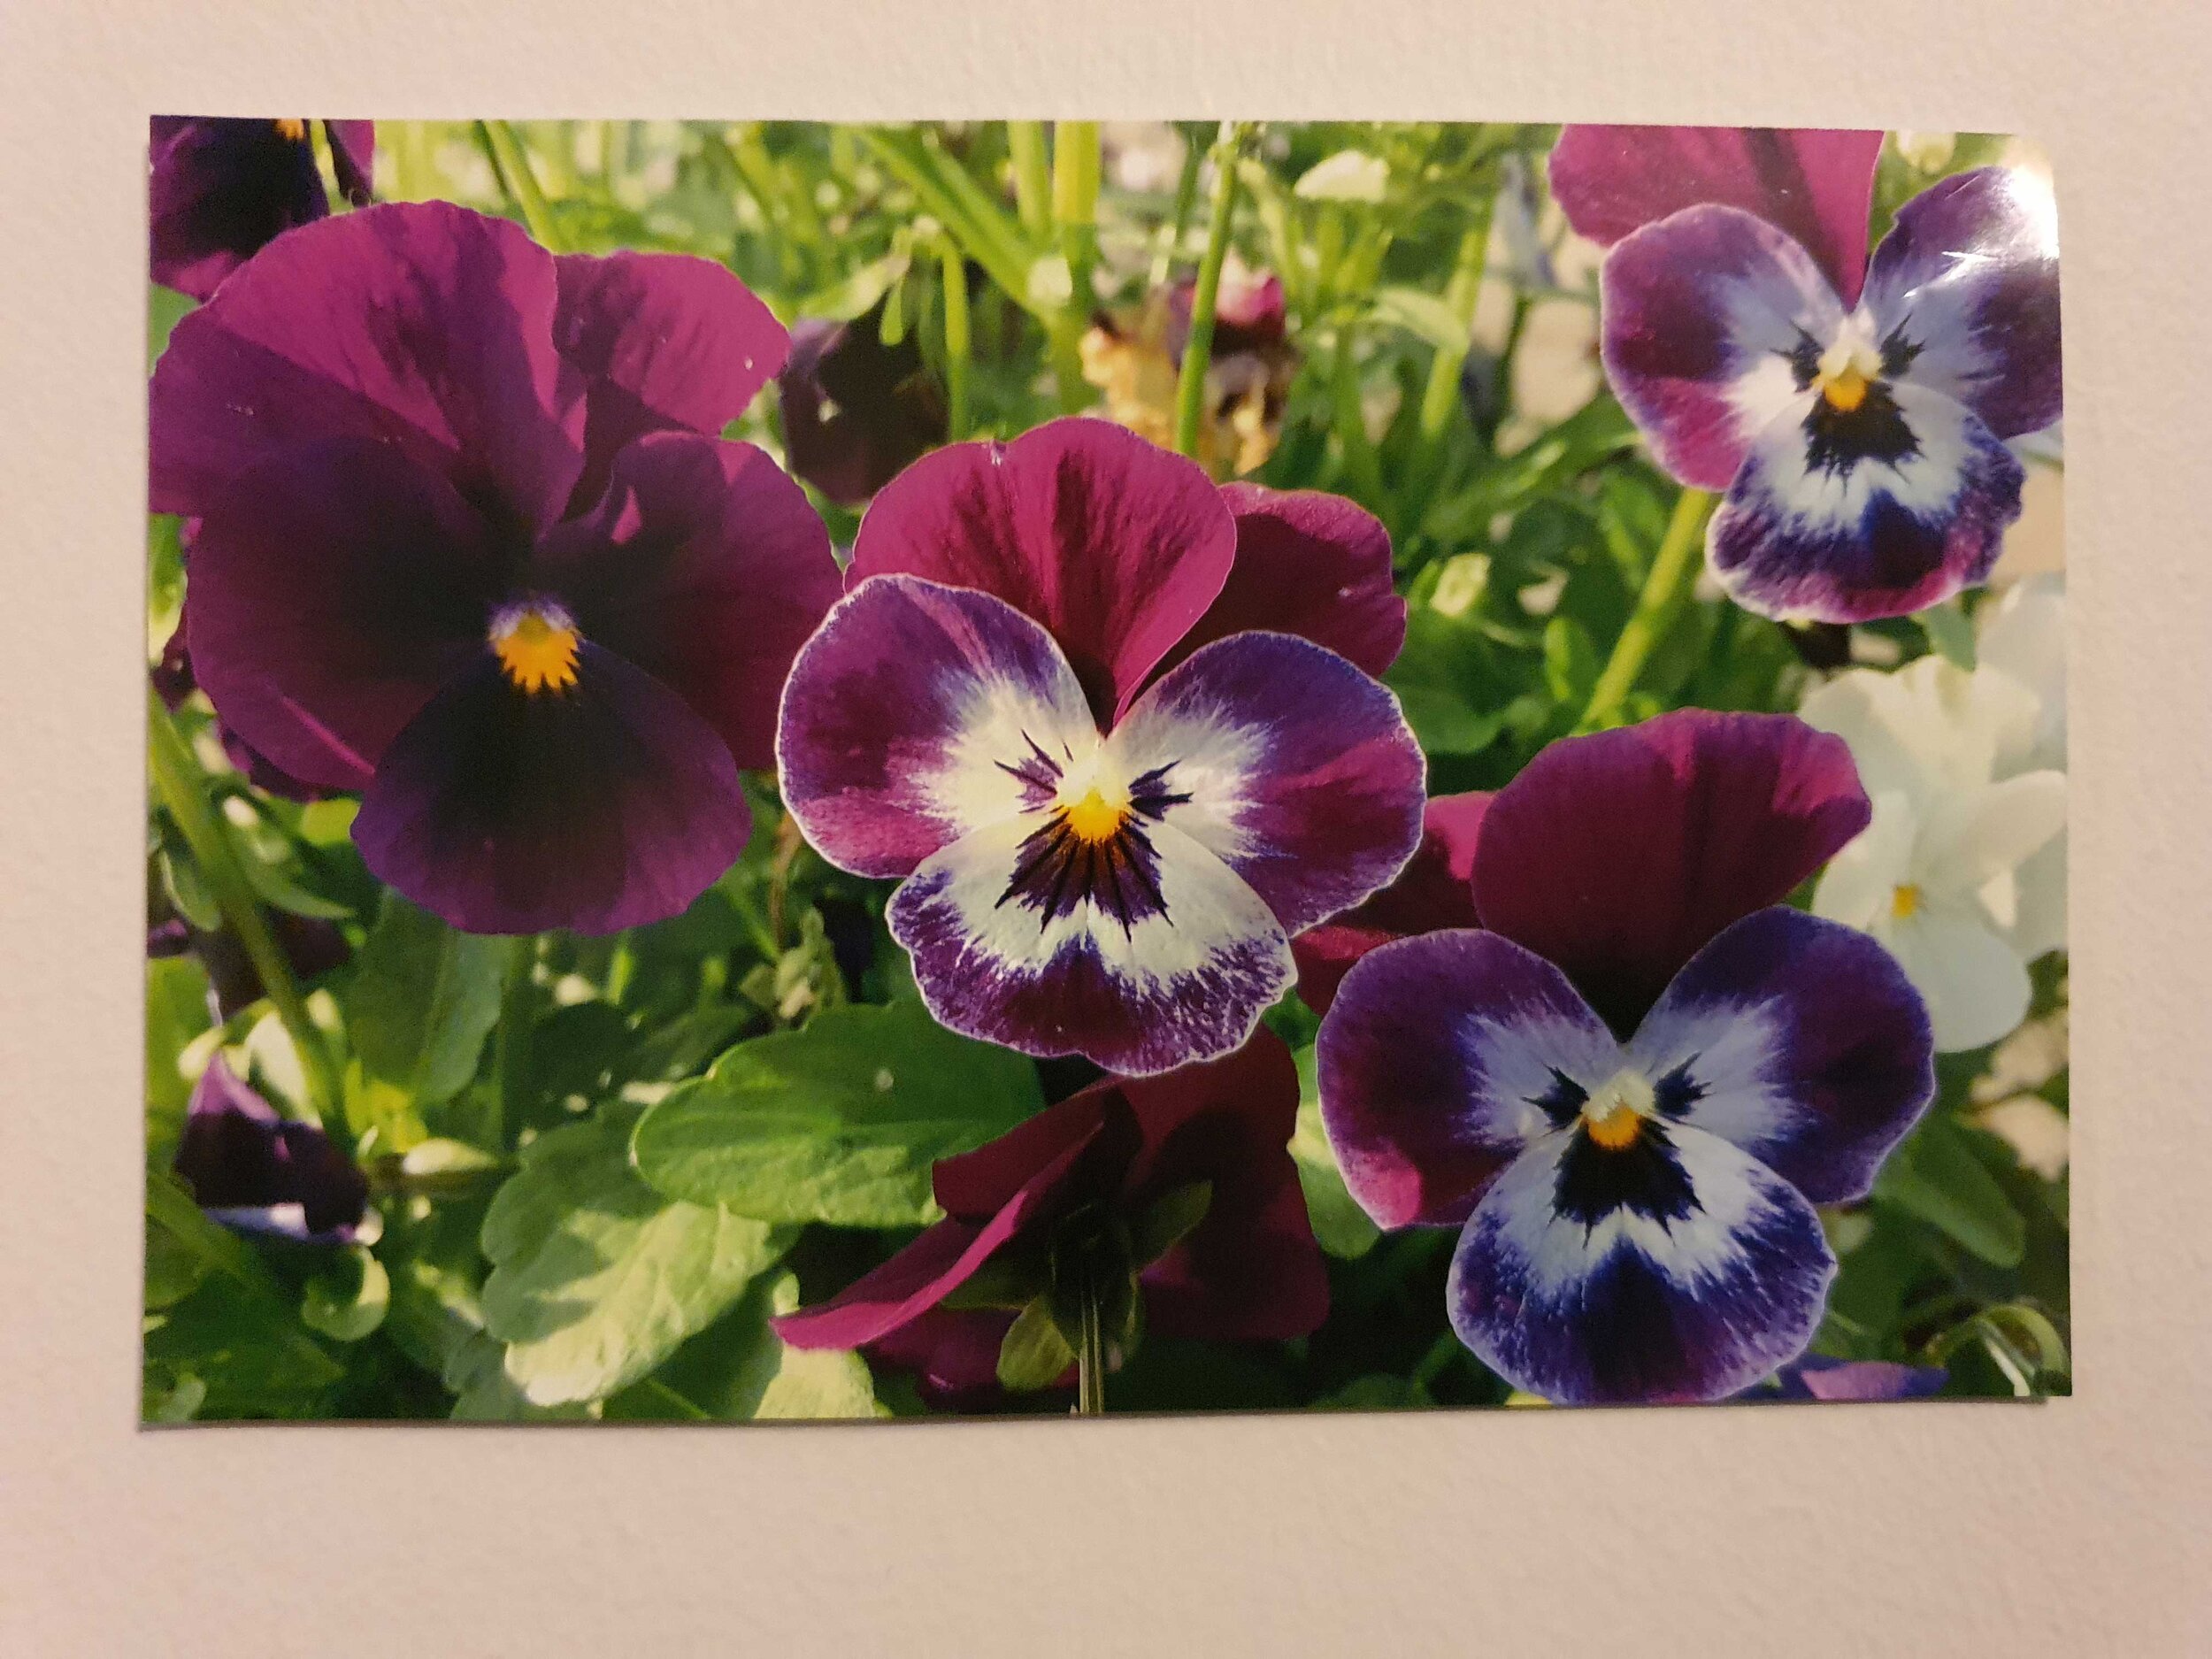 Sam Groundwater age 12 Positive Pansies